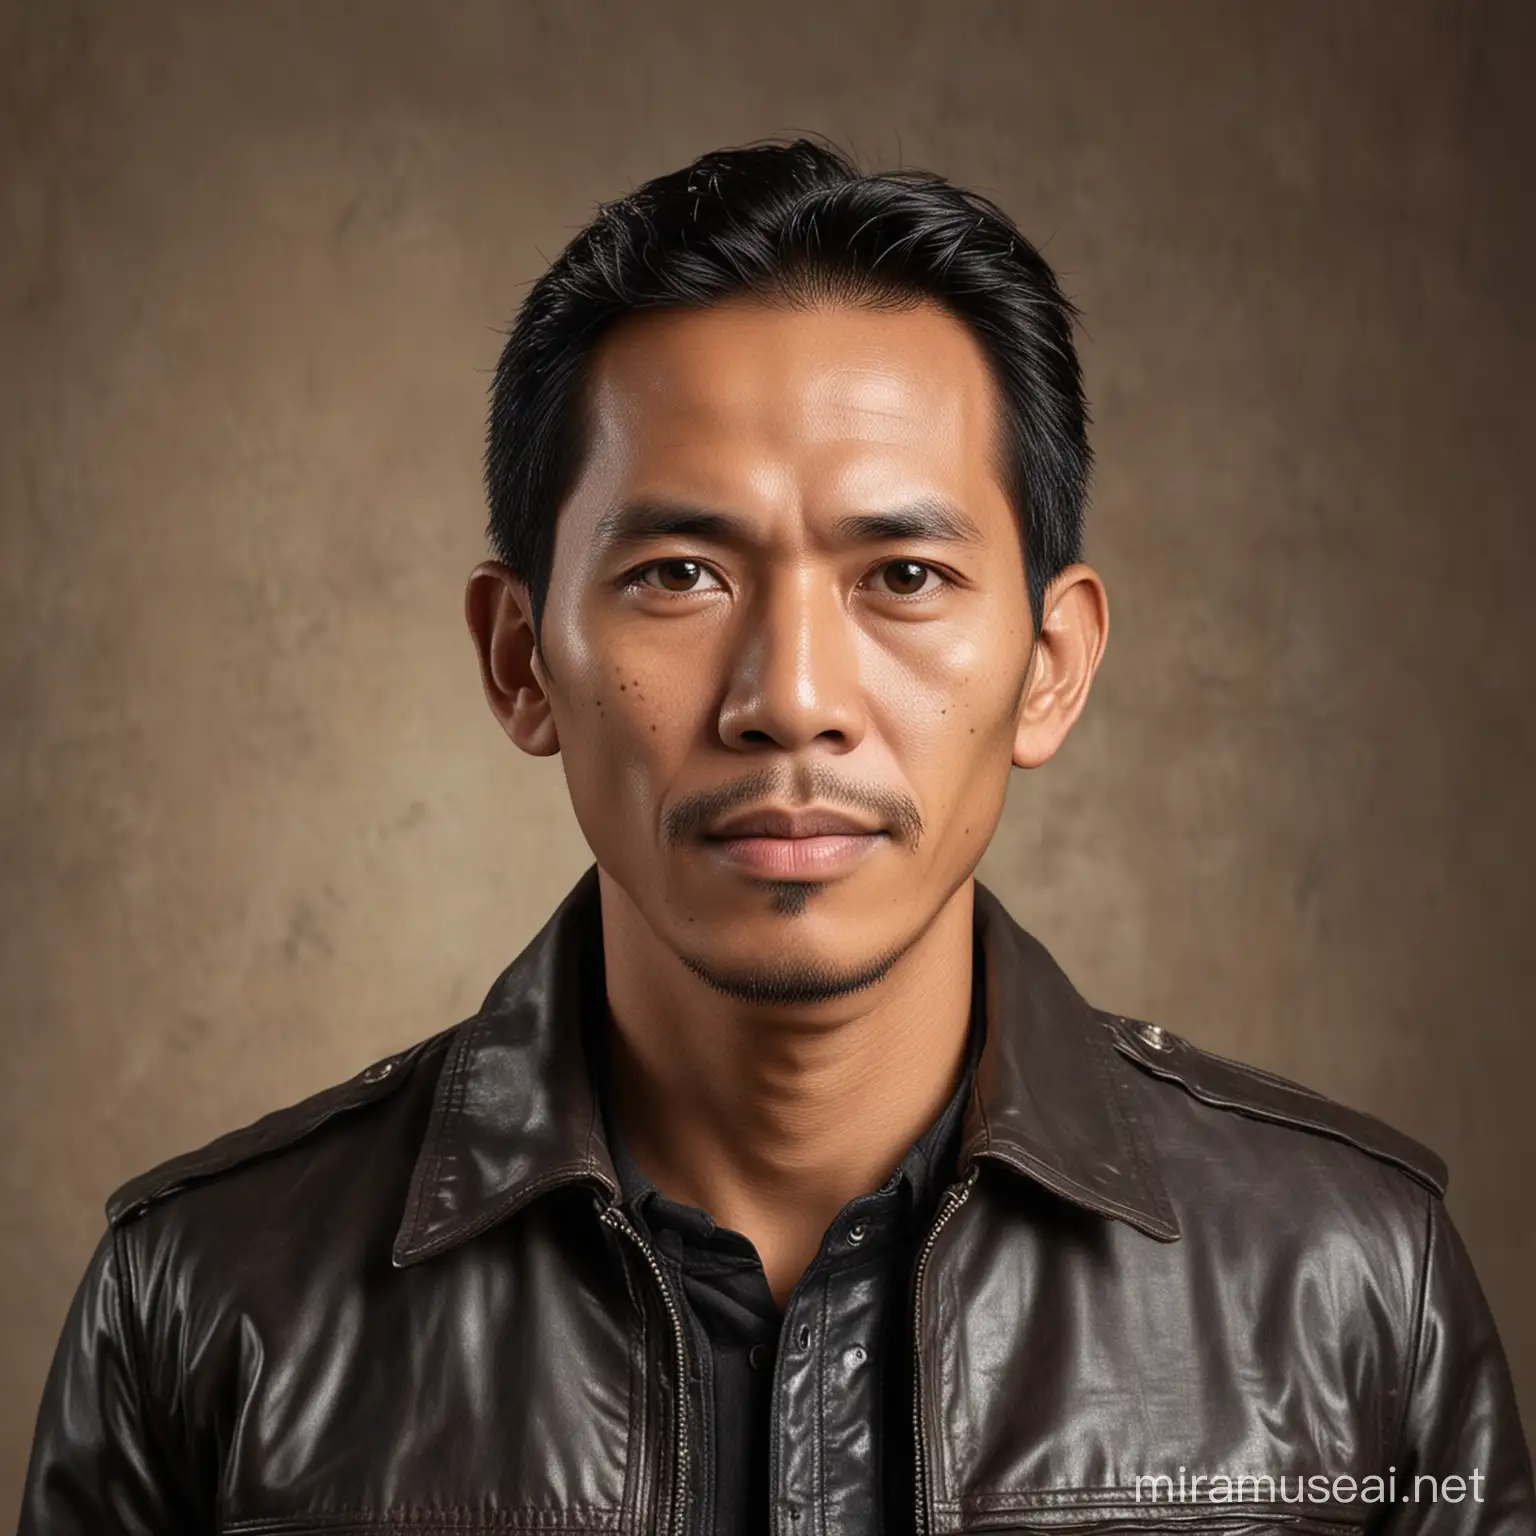 An Indonesian man 45 years ,clean face, wearing leather jacket, post war background